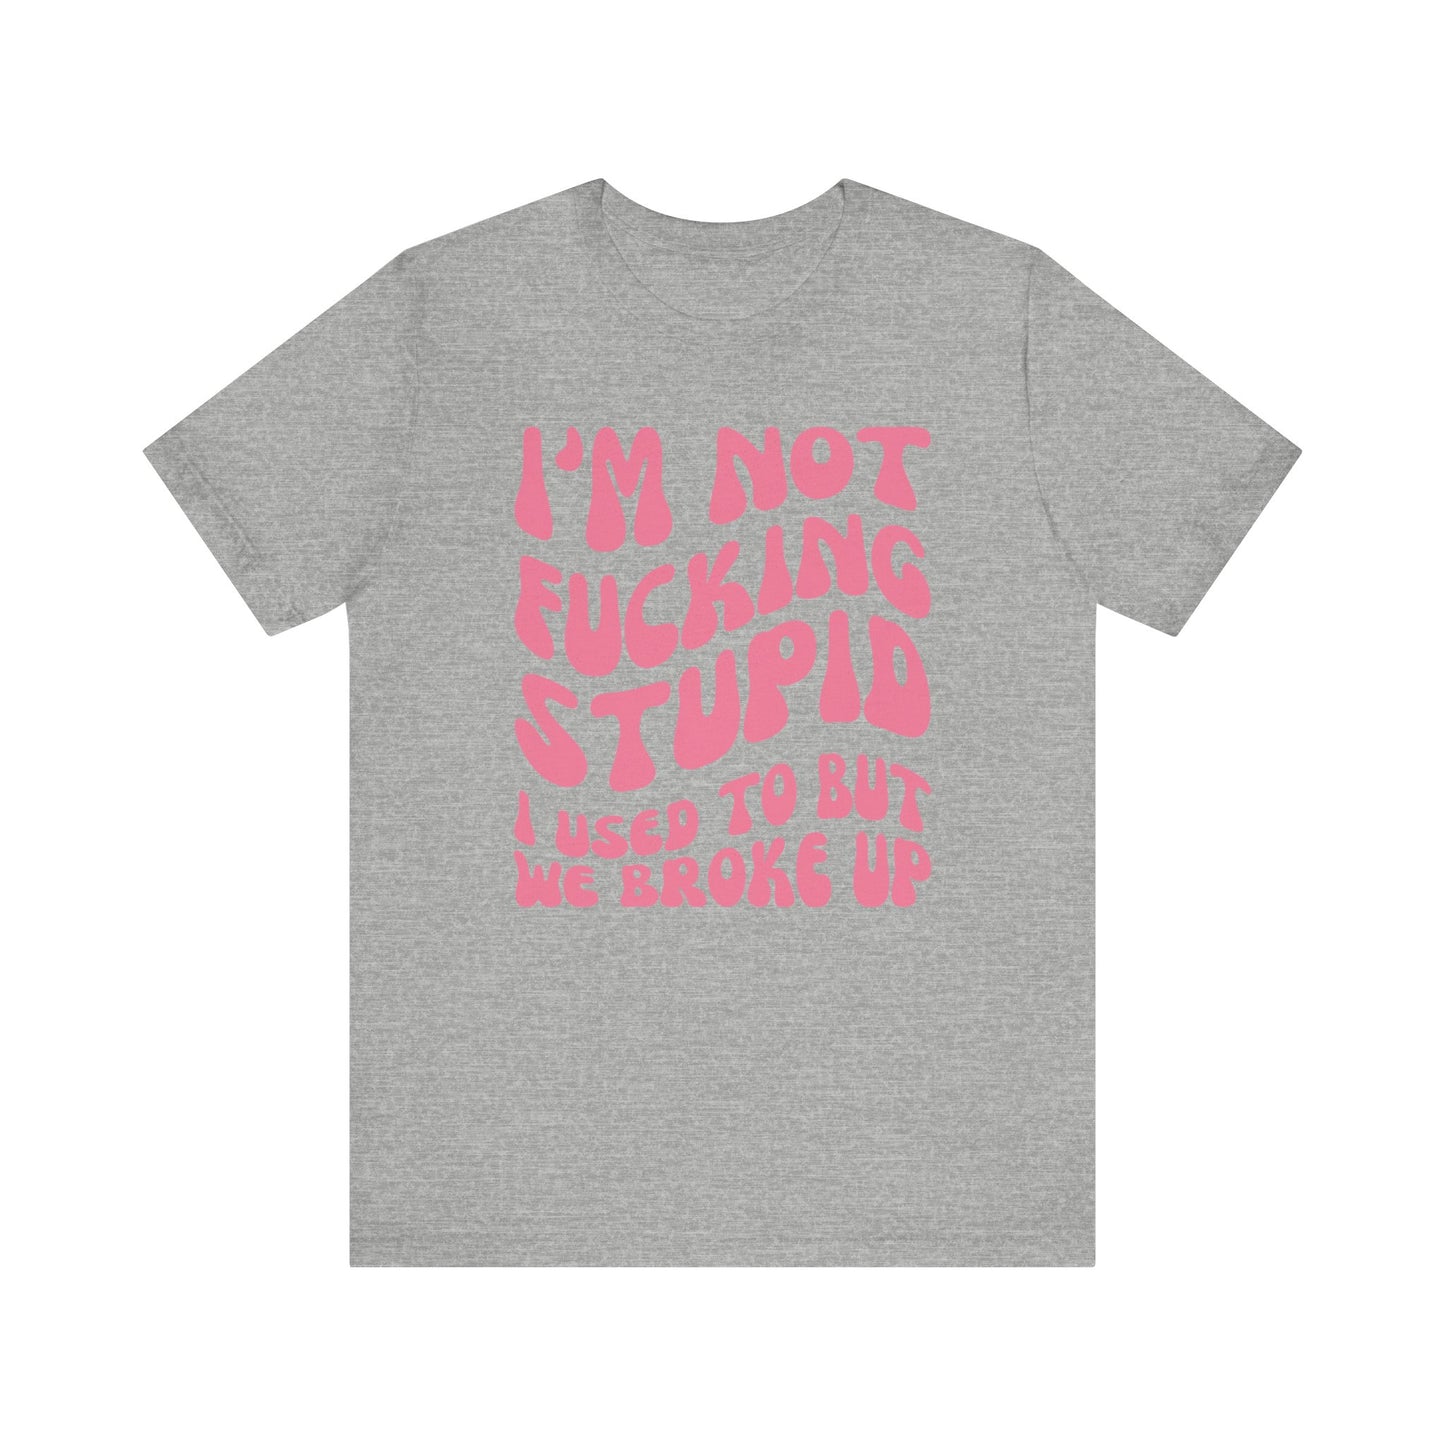 I'm Not Fucking Stupid I Used to But We Broke Up - Pink Font T-Shirt